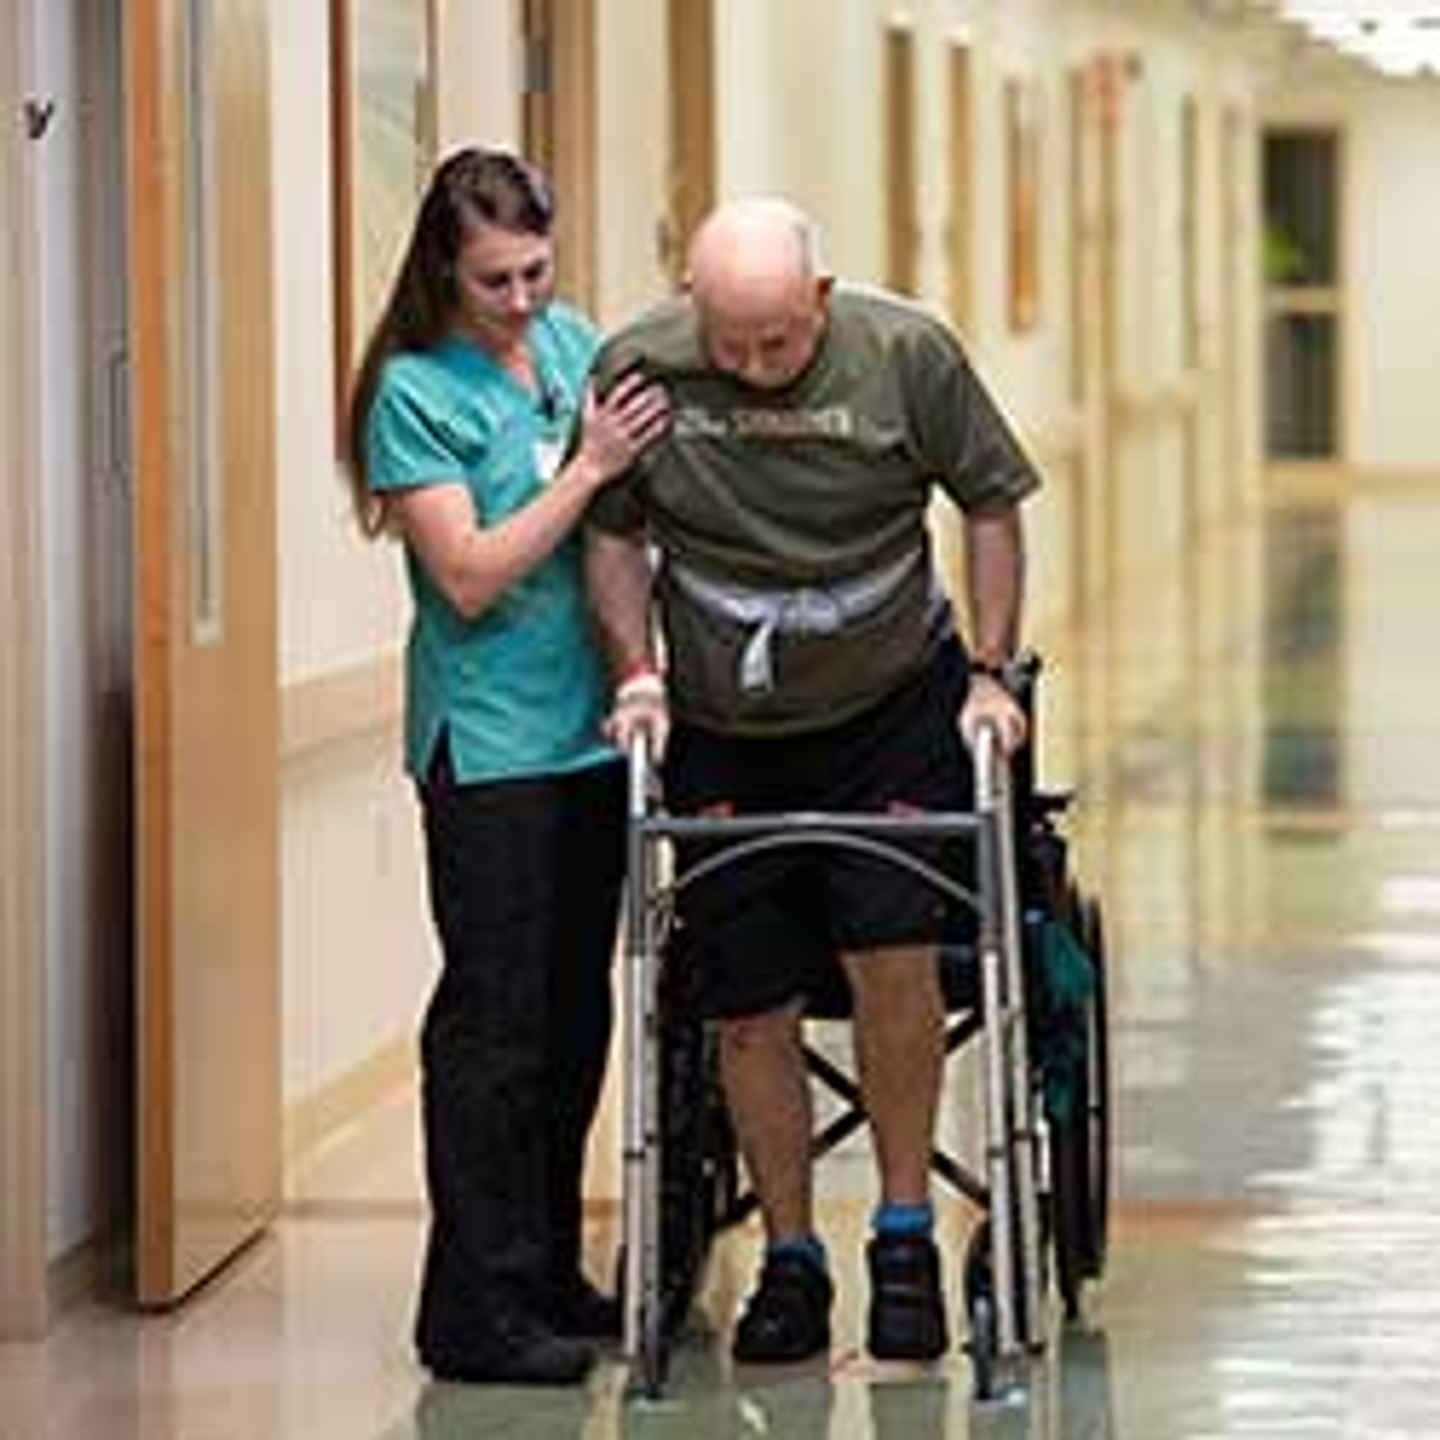 Physical therapist helping a patient walk down a hallway.